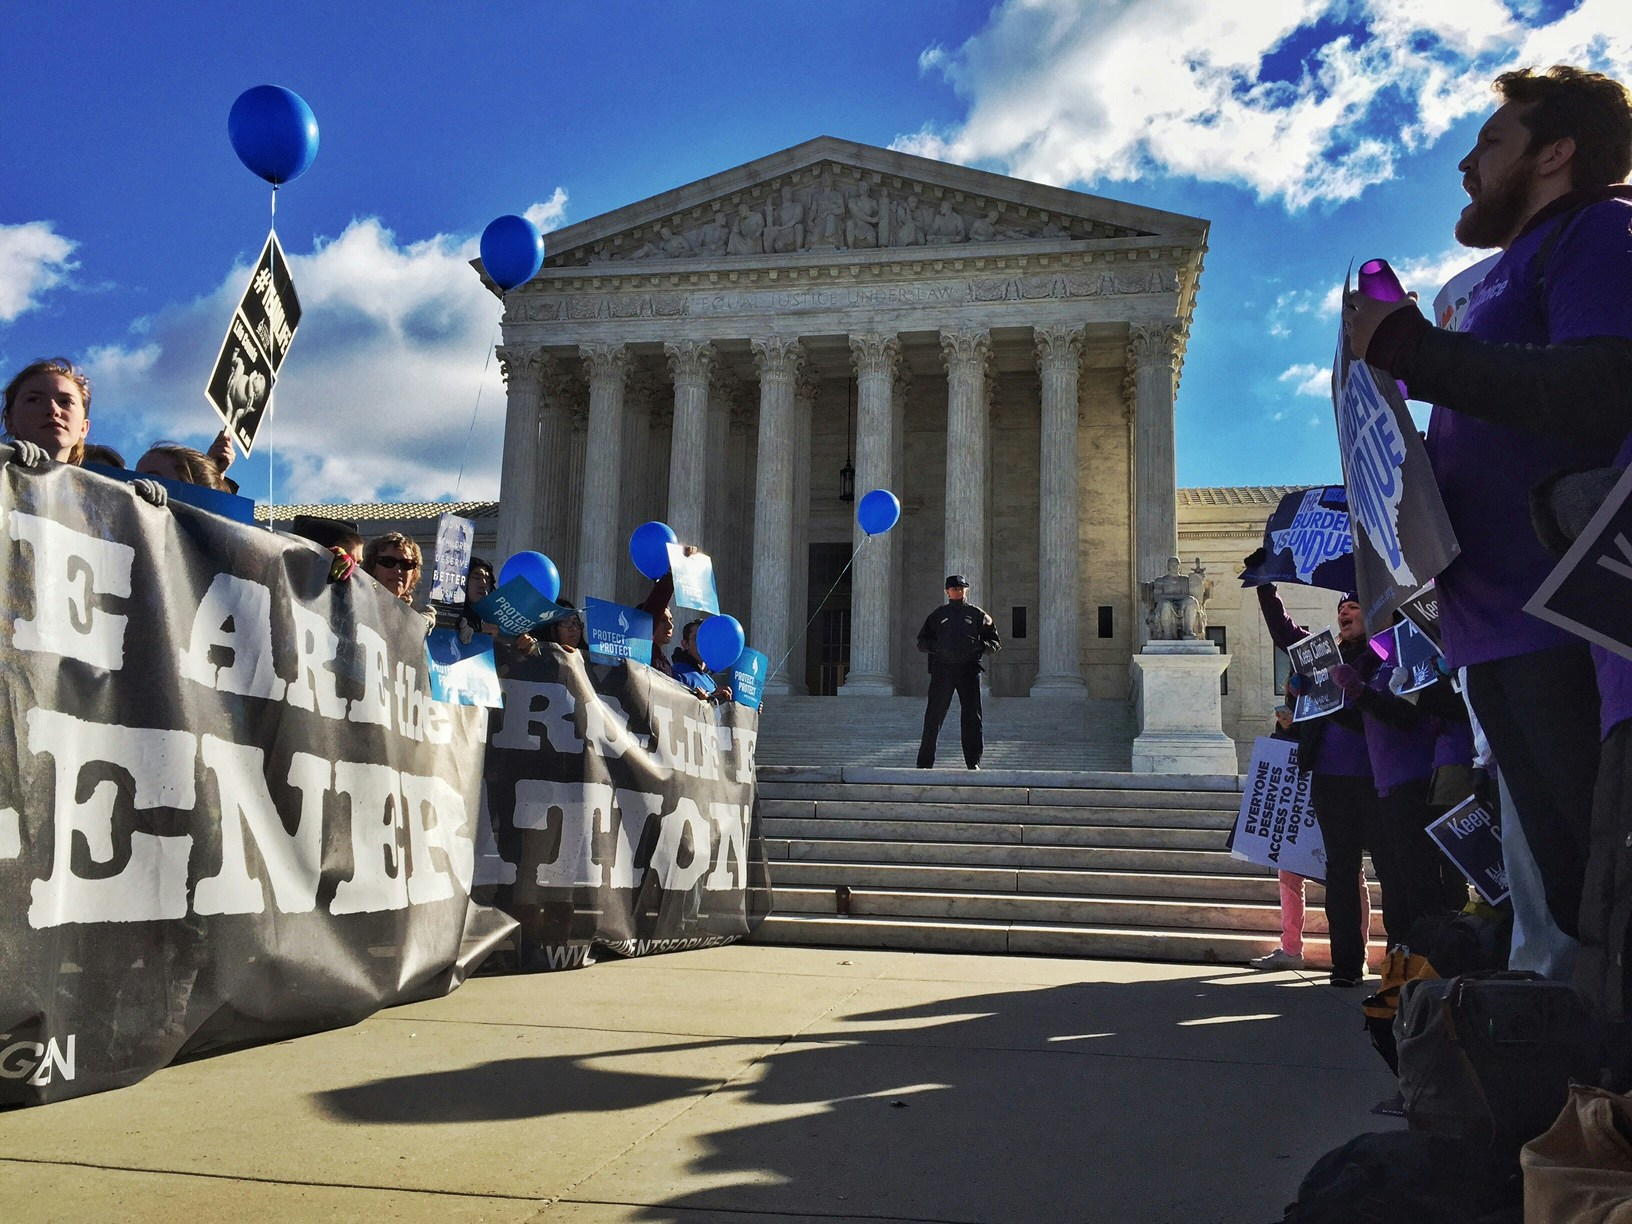 WASHINGTON, DC - MARCH 2: Pro-choice advocates, right, face off against anti-abortion supporters during a rally at the Supreme Court Wednesday March 2, 2016, as Justices hear a case concerning a Texas law regulating abortion clinics and providers. (Photo by Bill O'Leary/The Washington Post via Getty Images)